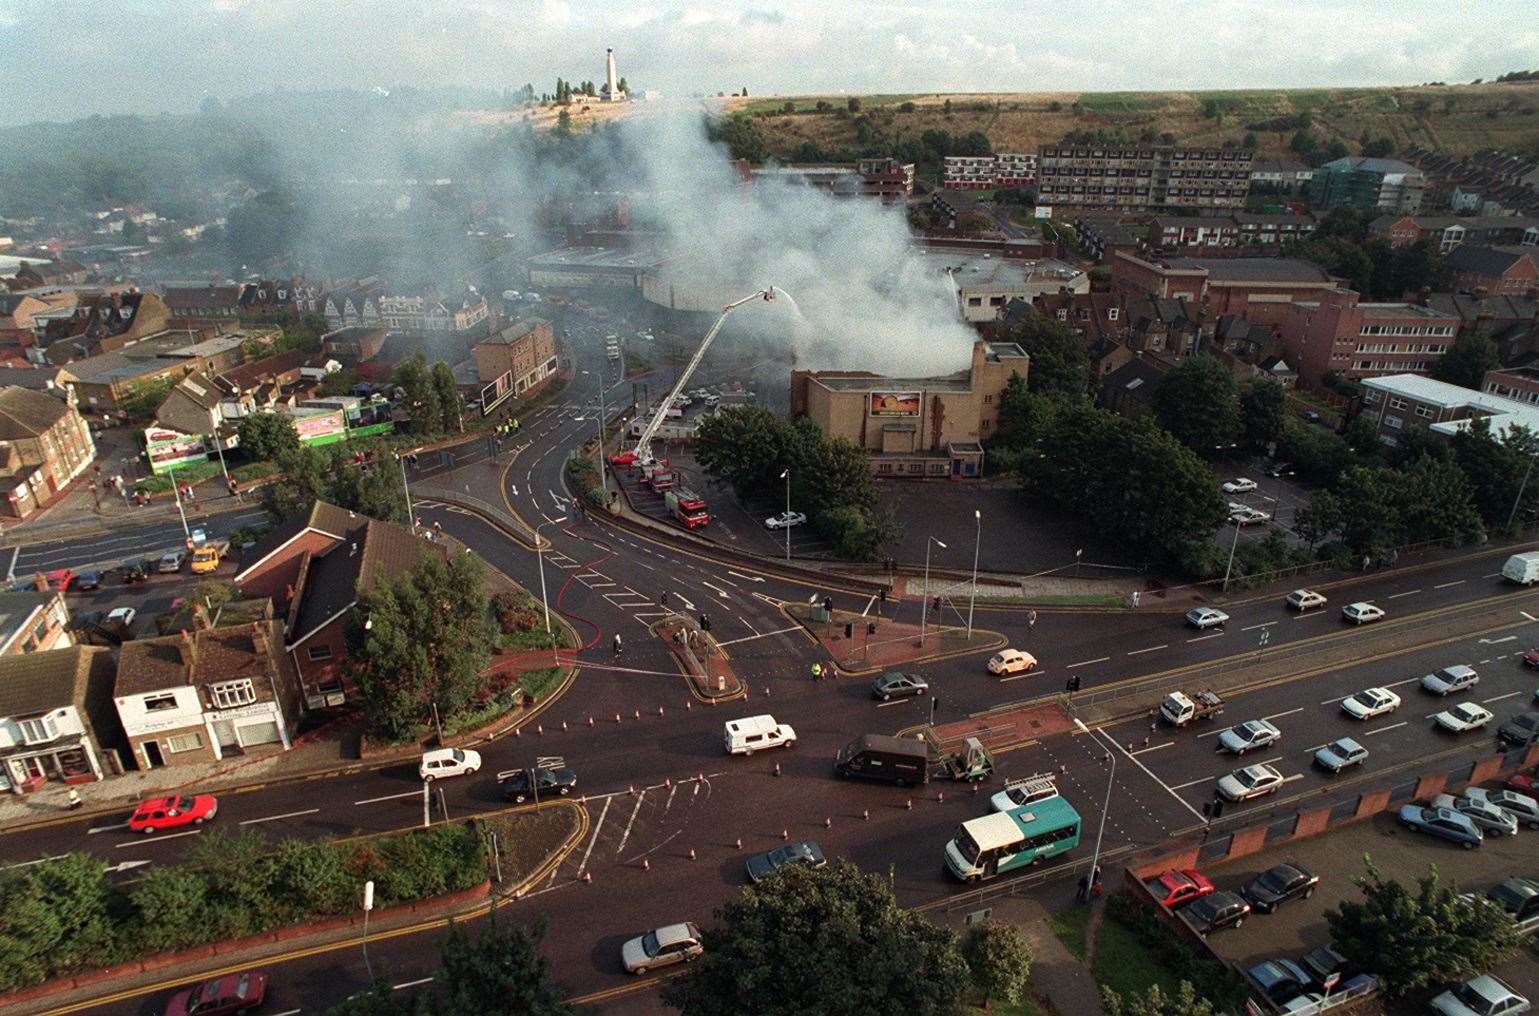 The blaze at the Gala Bingo Hall in Chatham High Street Picture: Medway Book 2003